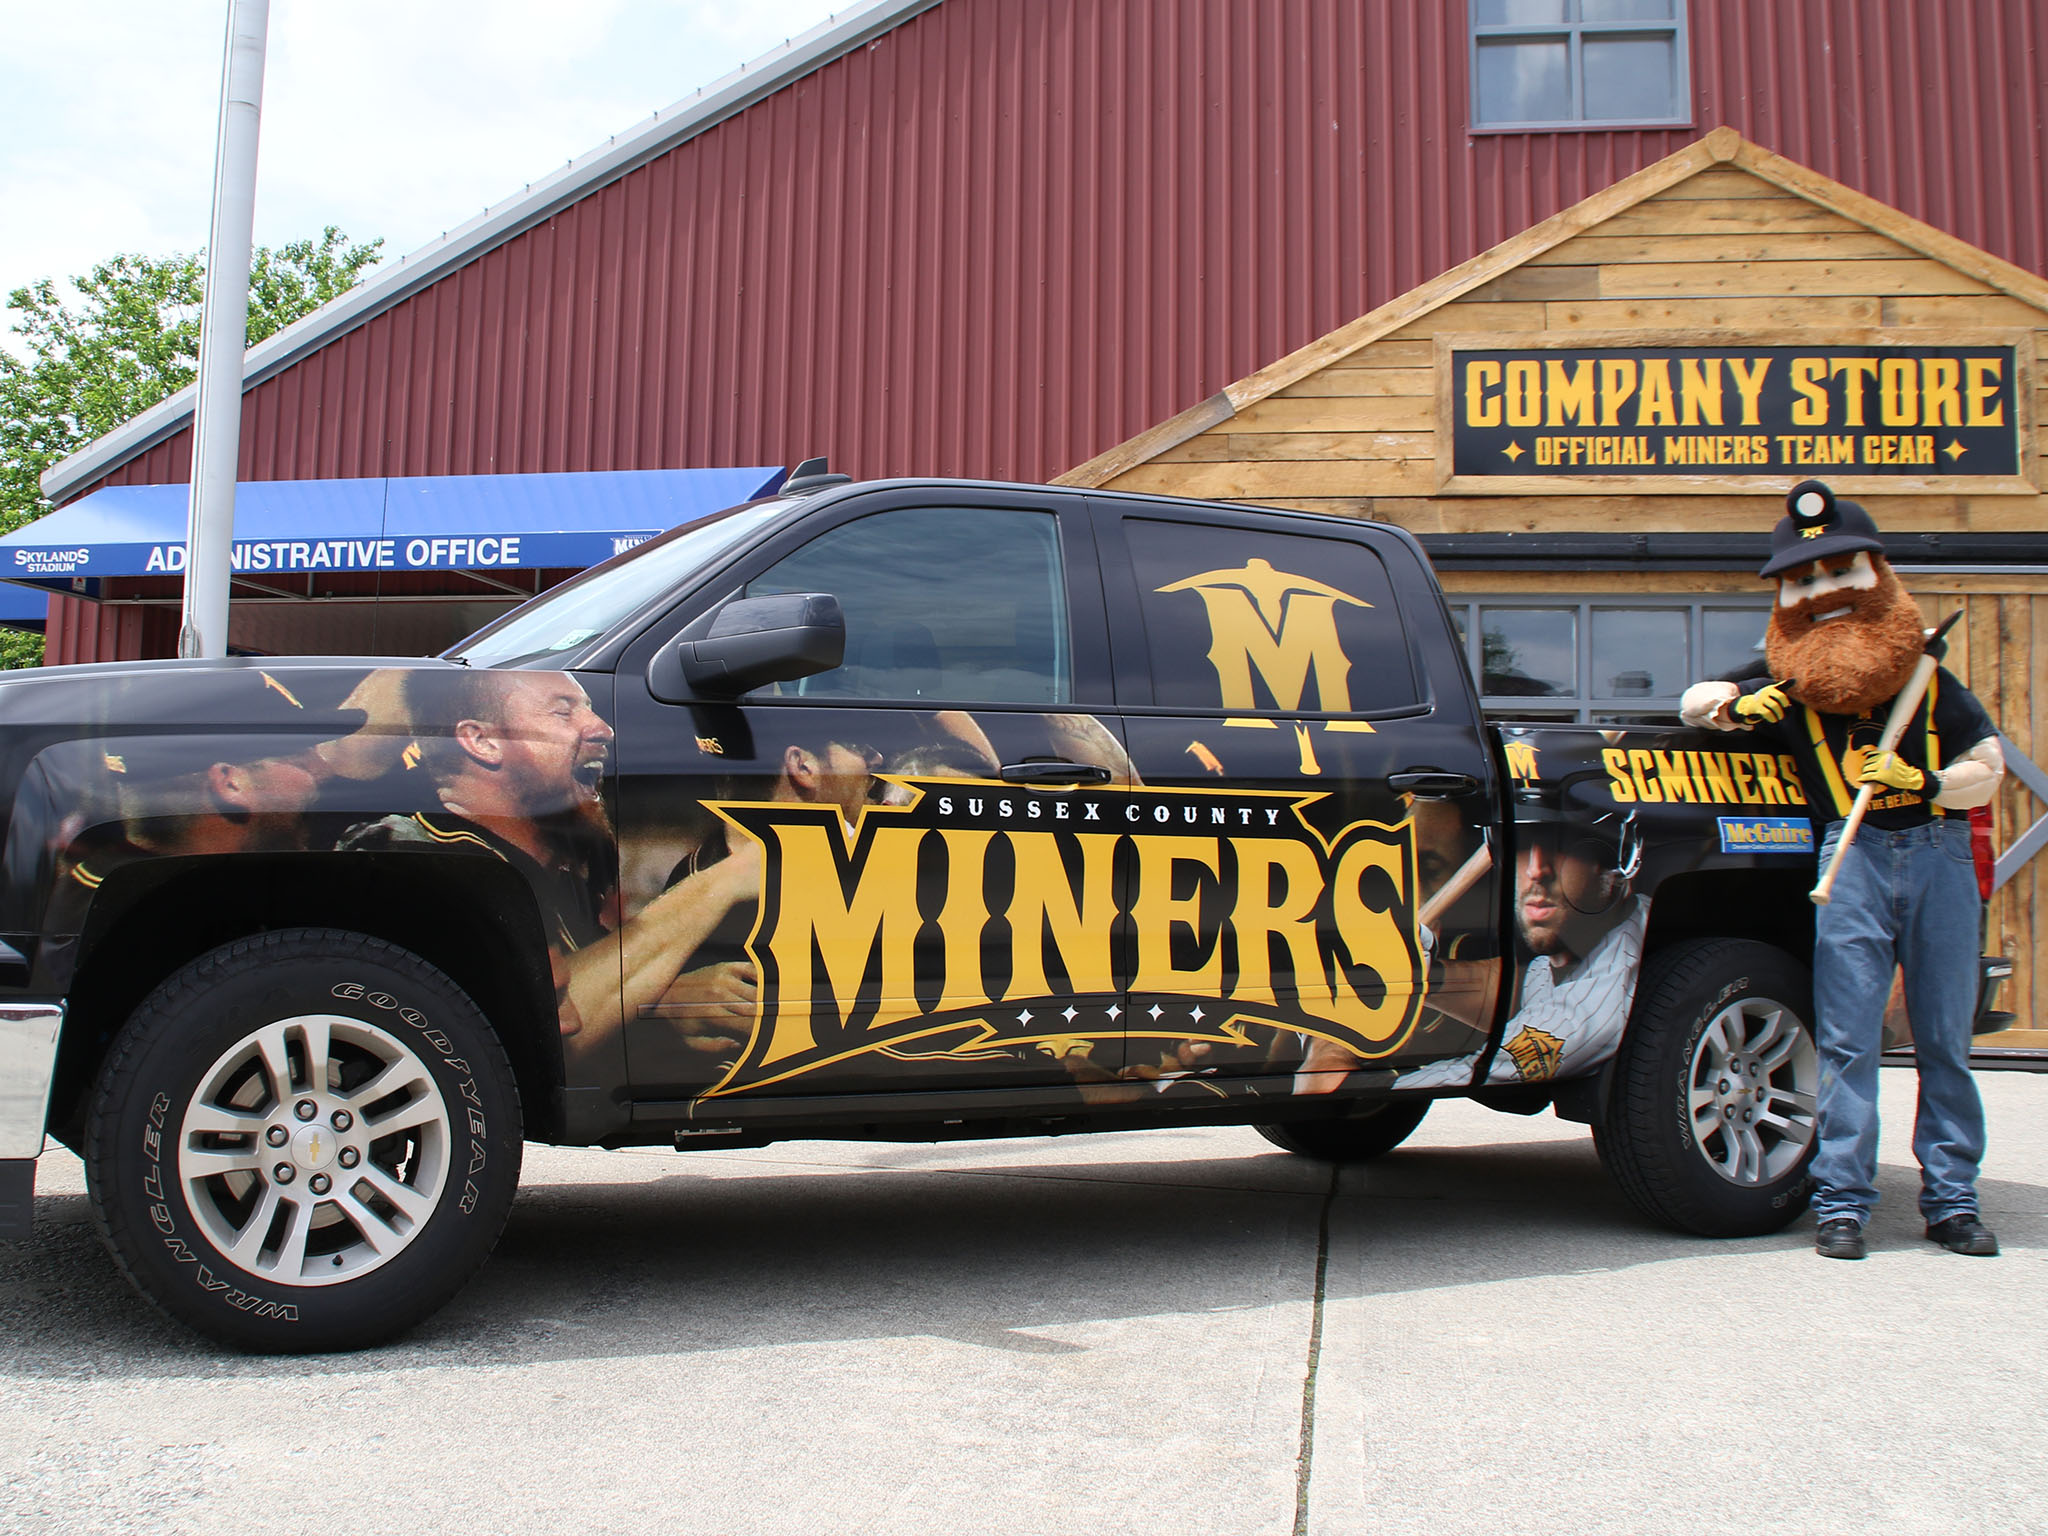 Custom truck wrap design for the Sussex County Miners professional baseball team. Design incorporates the…